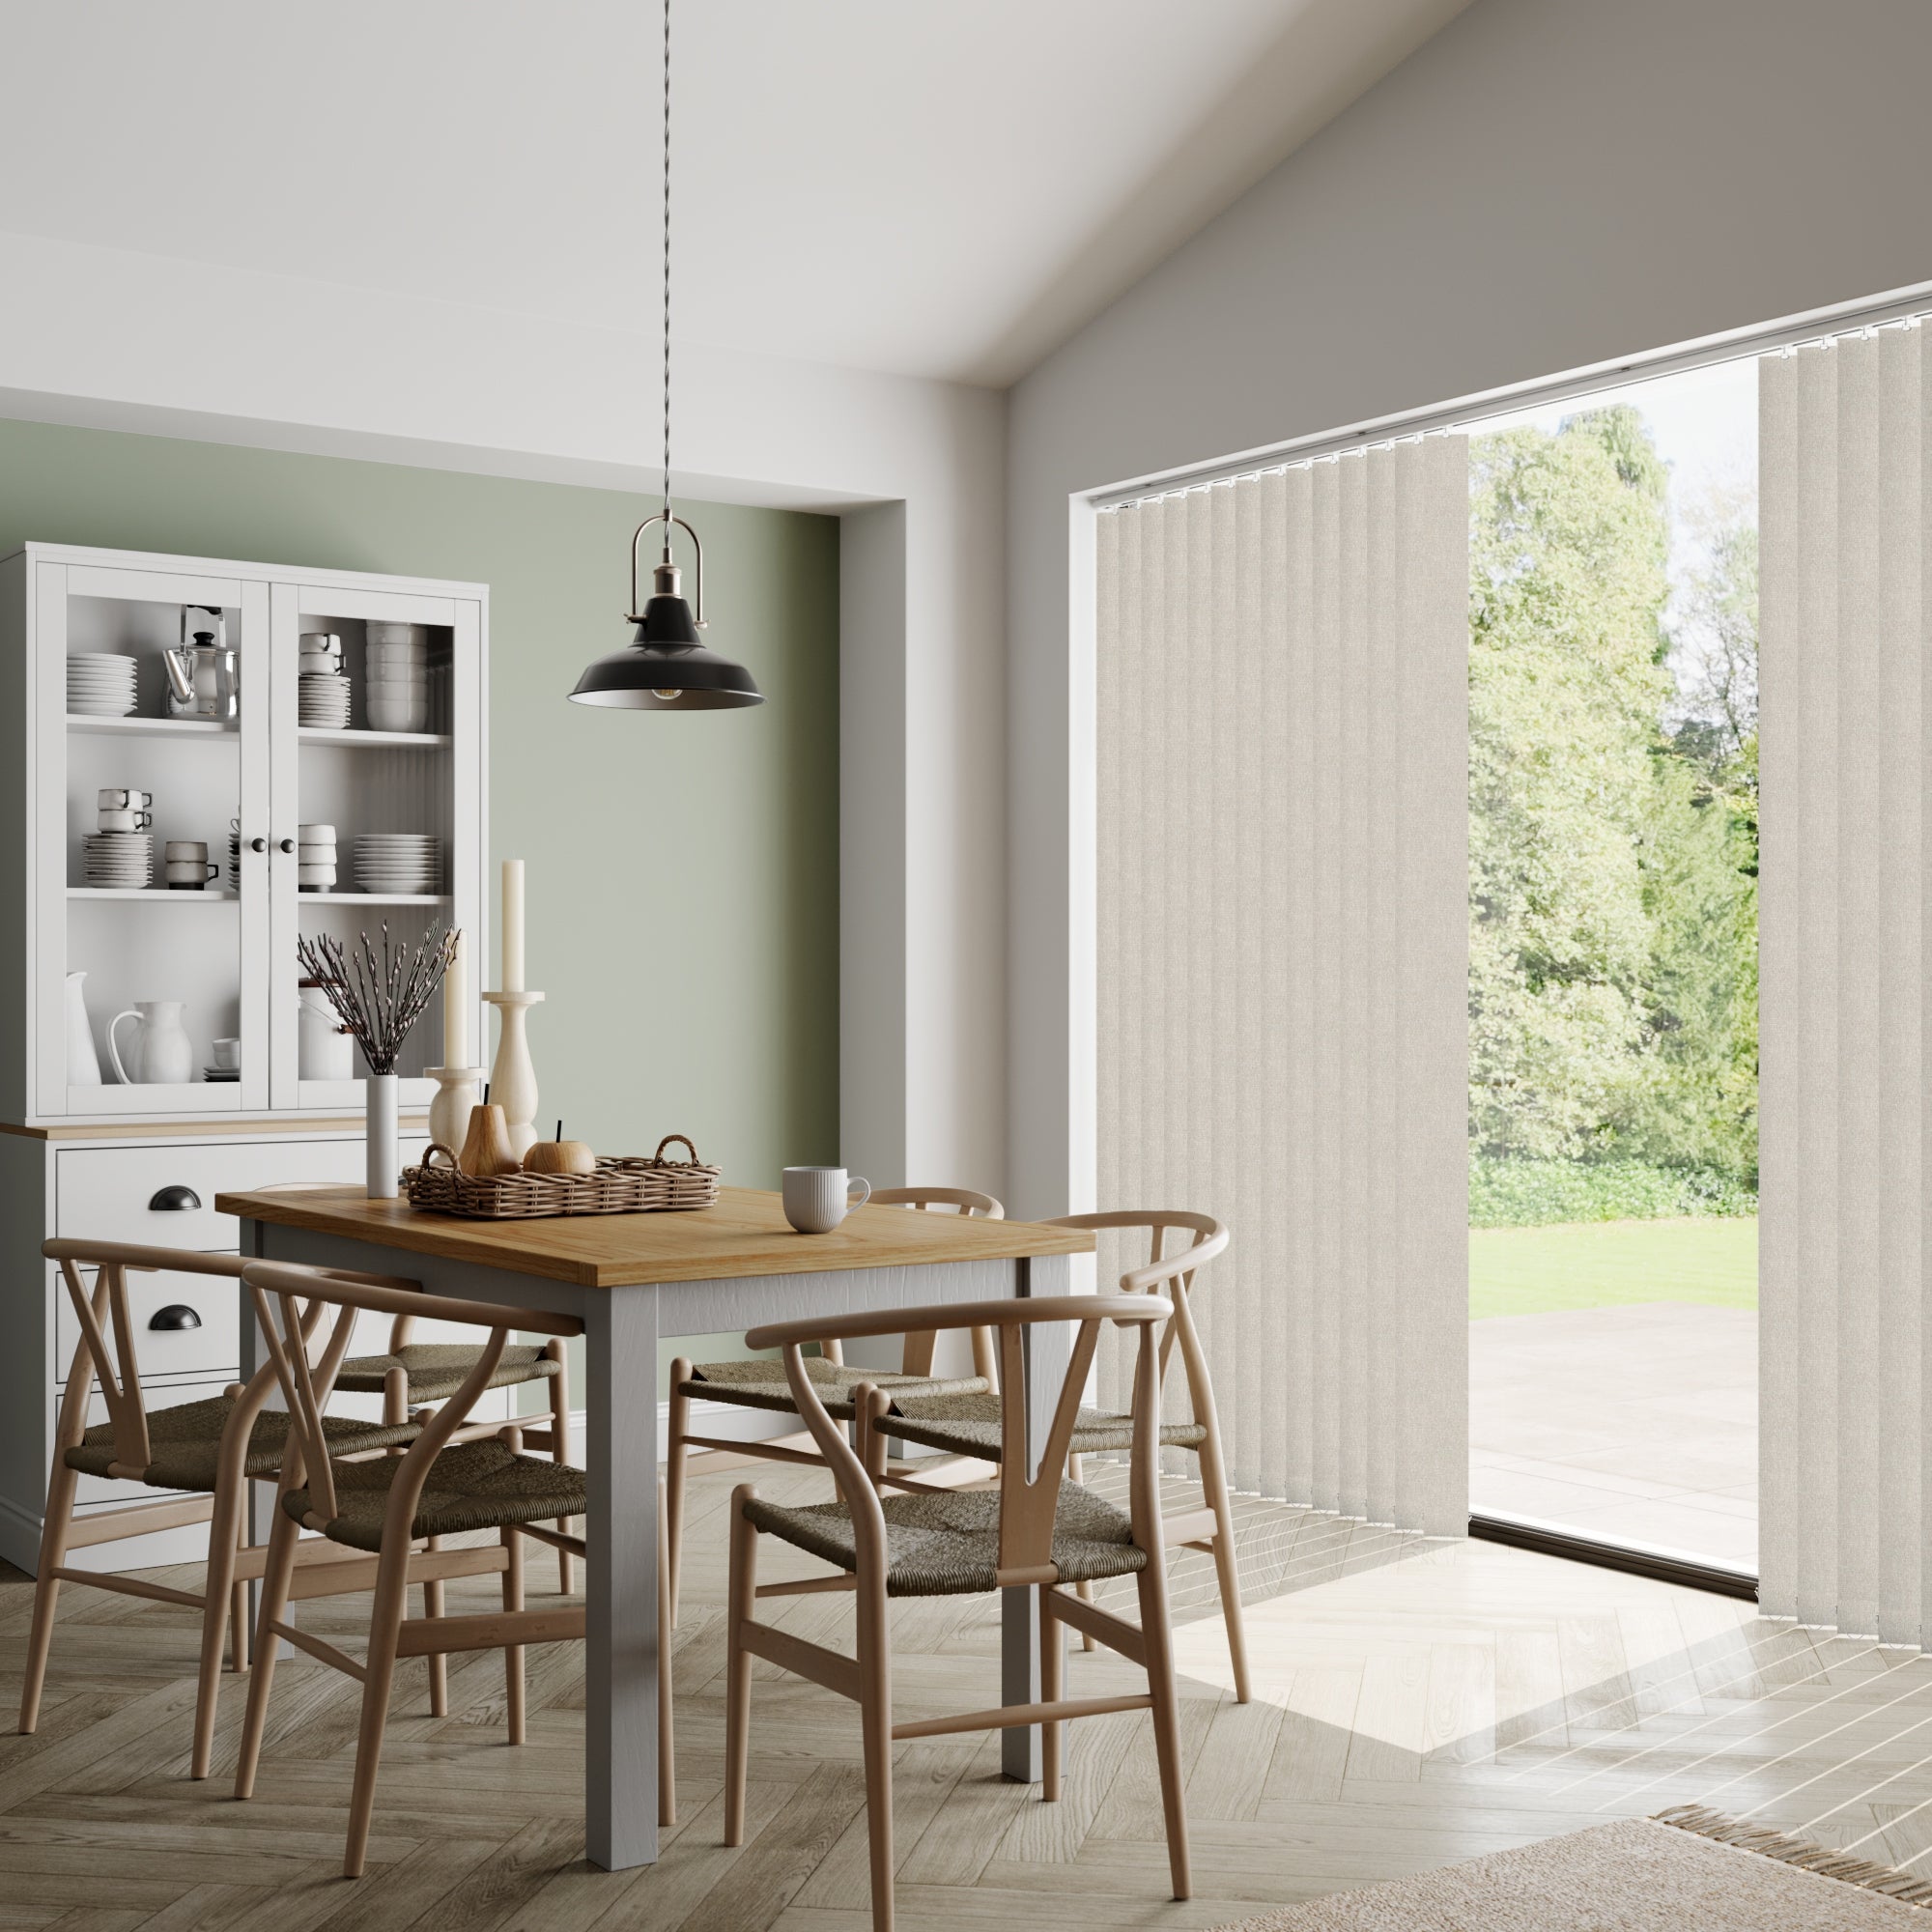 Henlow Made to Measure Vertical Blind Henlow Sand